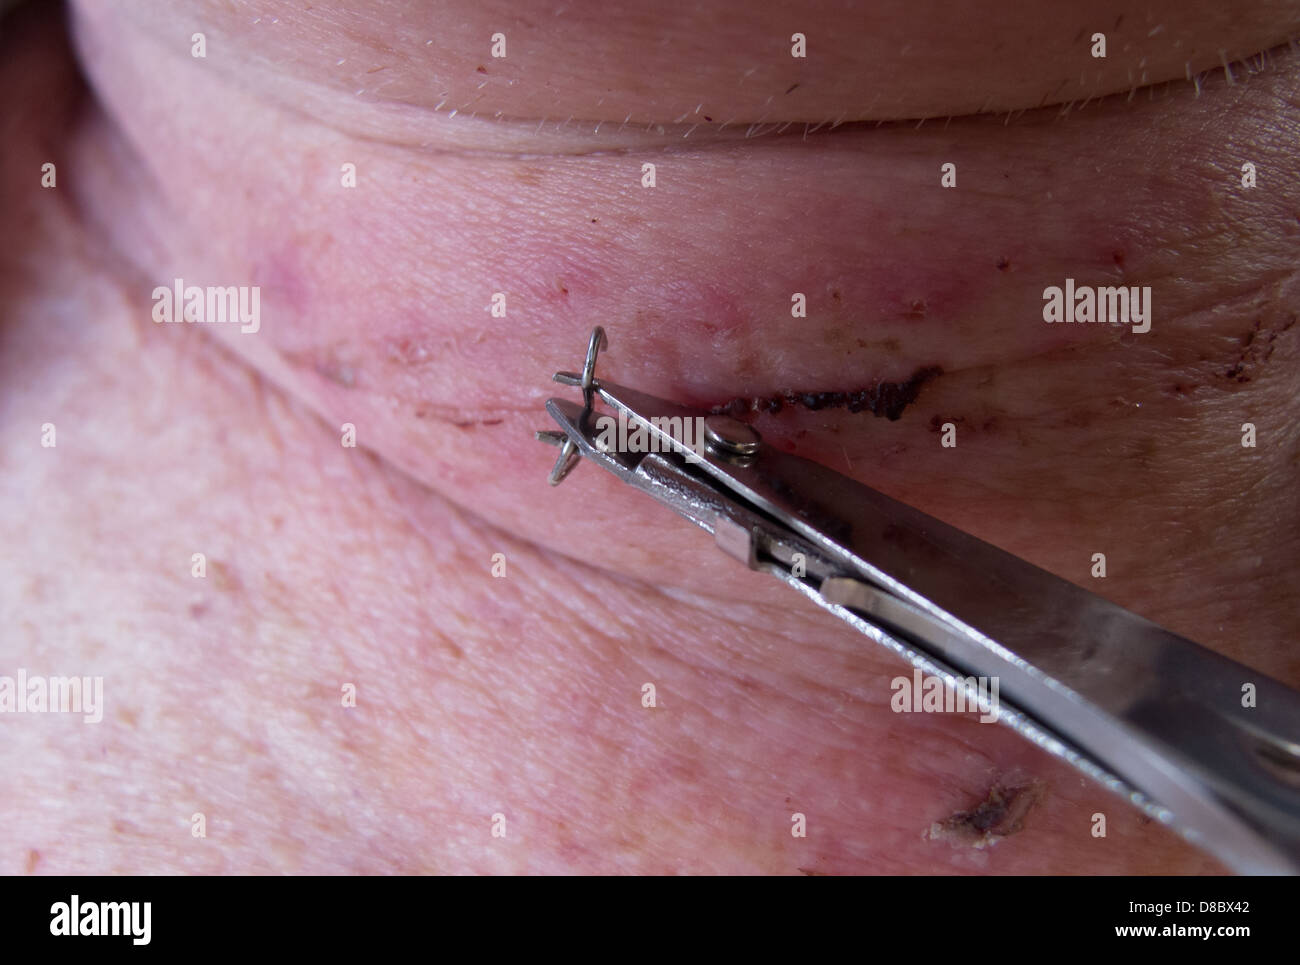 Medical instrument being used to remove surgical clip from  post-thyroidectomy incision.Shows how the instrument grips the clip Stock  Photo - Alamy